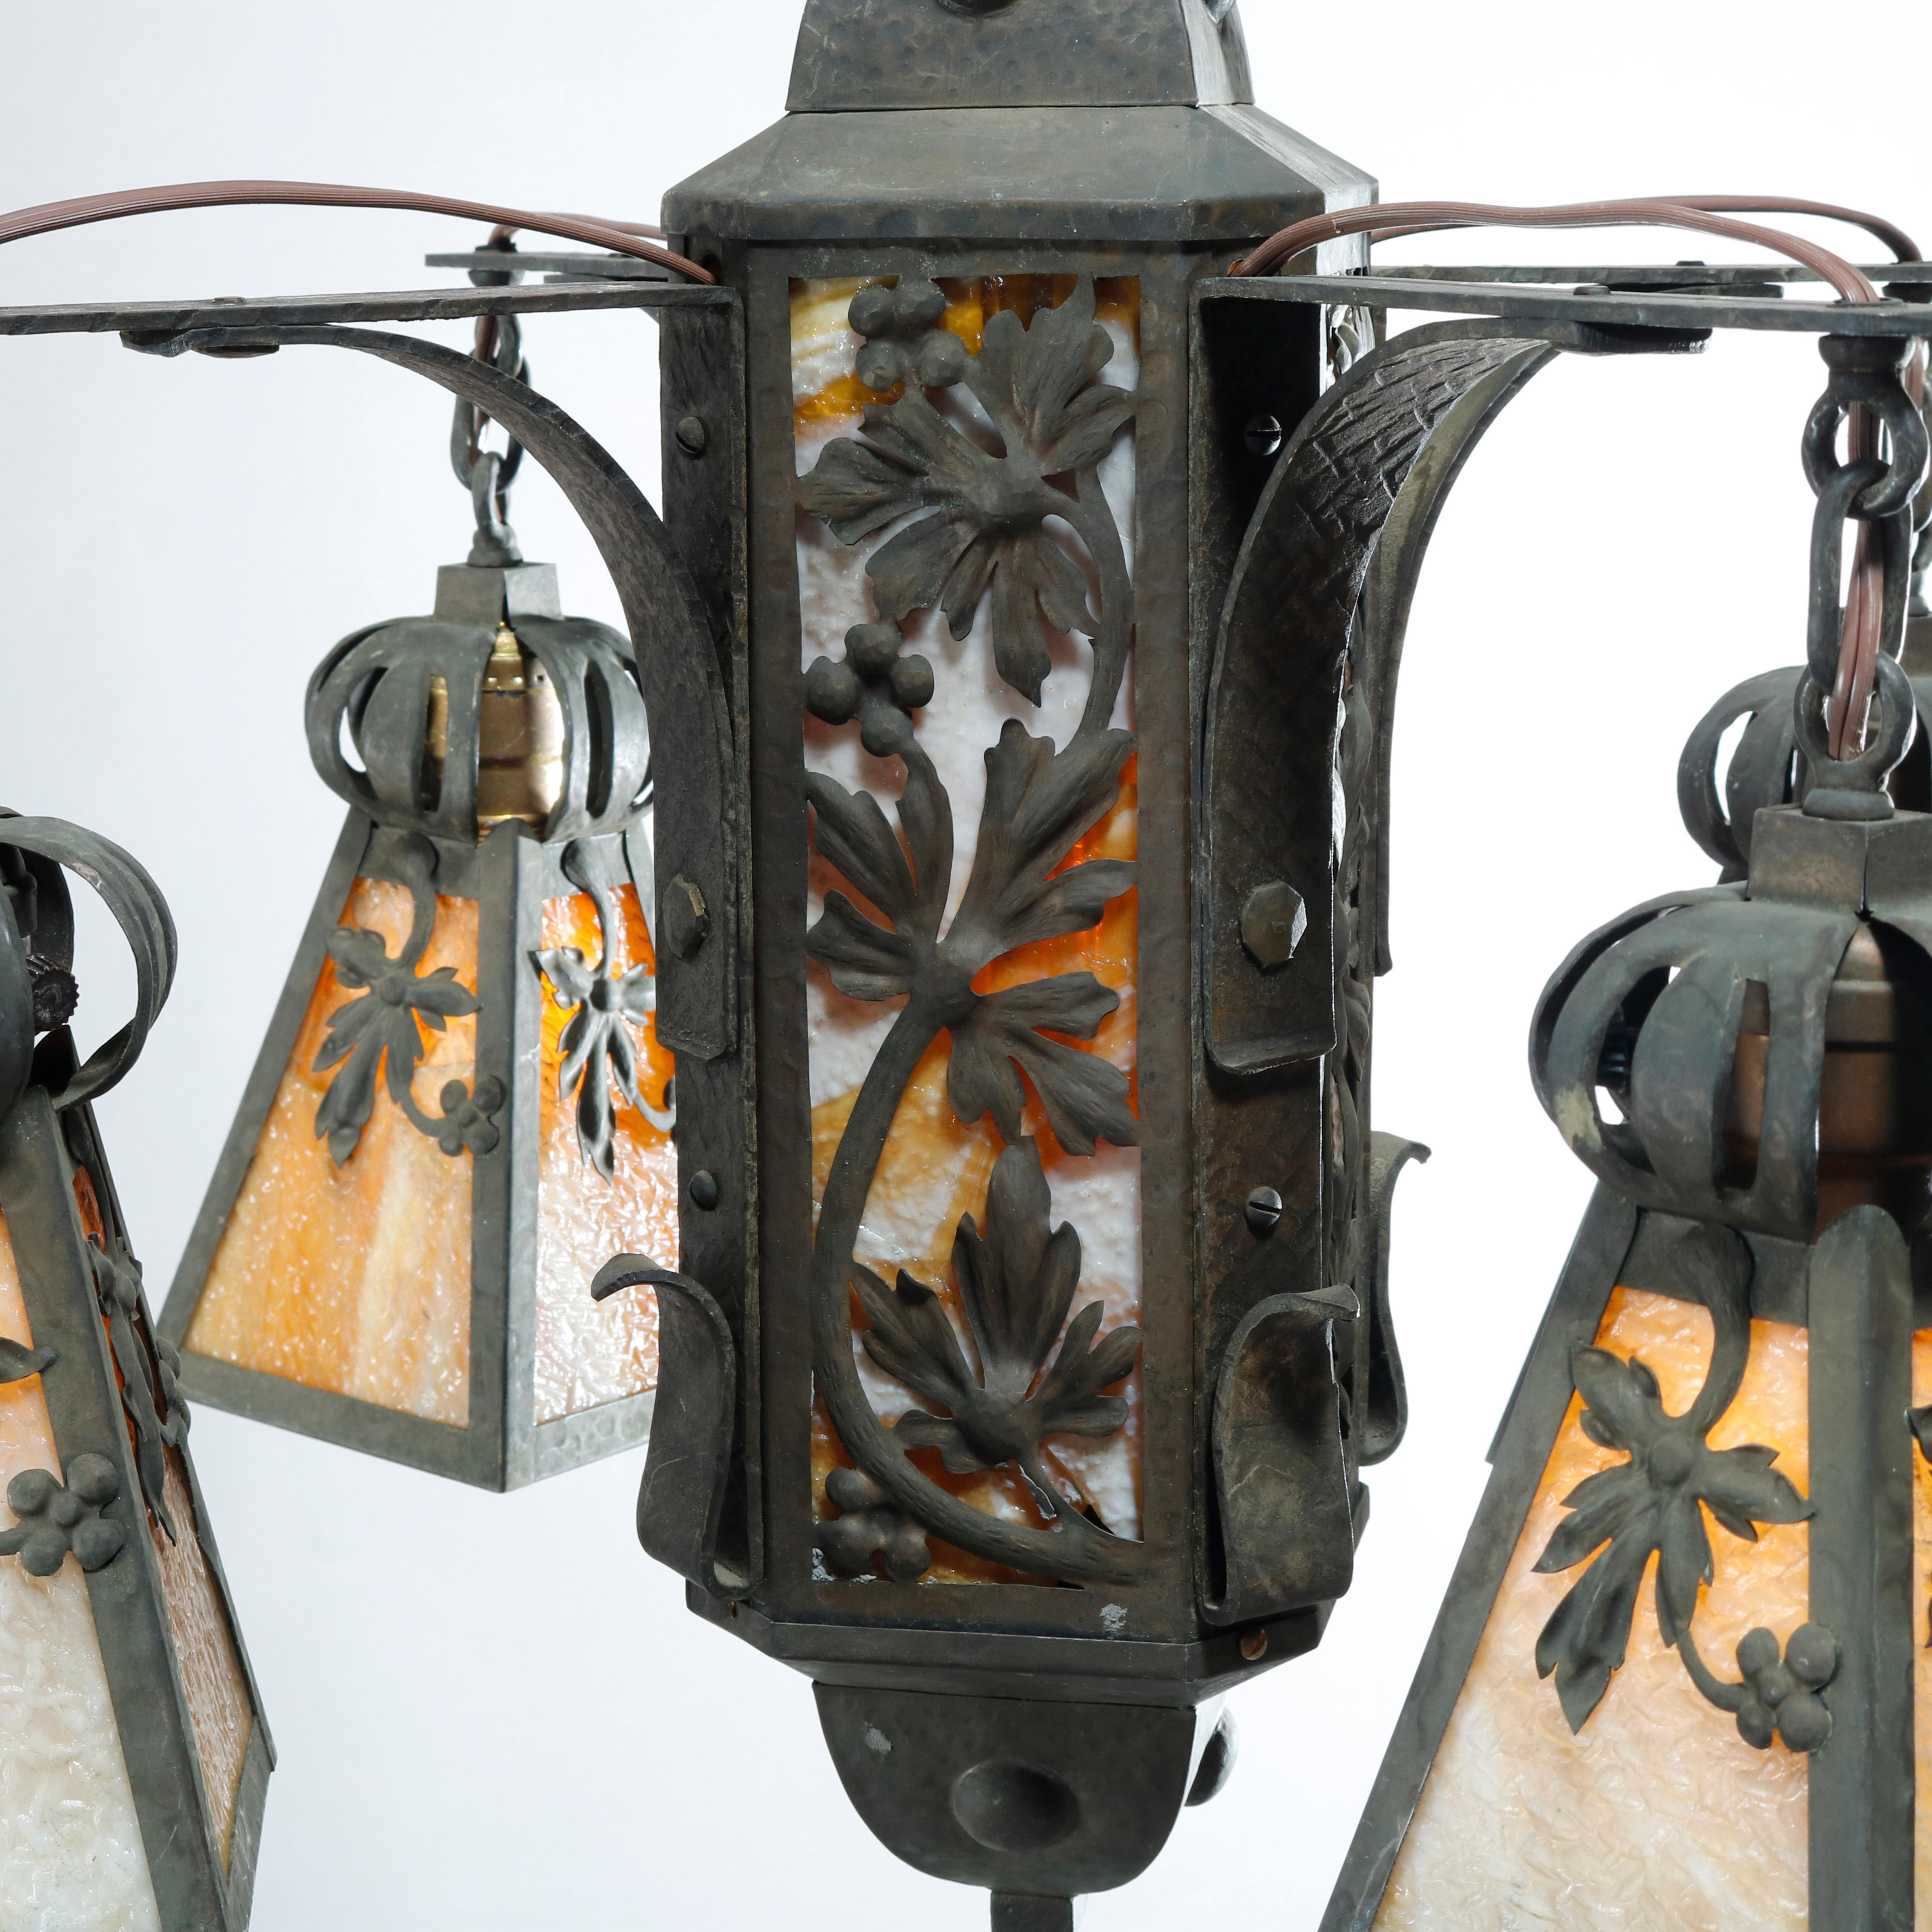 An antique Arts & Crafts ceiling fixture offers wrought iron construction with body having sides with stylized floral elements over slag glass panels and four arms terminating in lantern form drop fixtures, c1910

Measures: 37